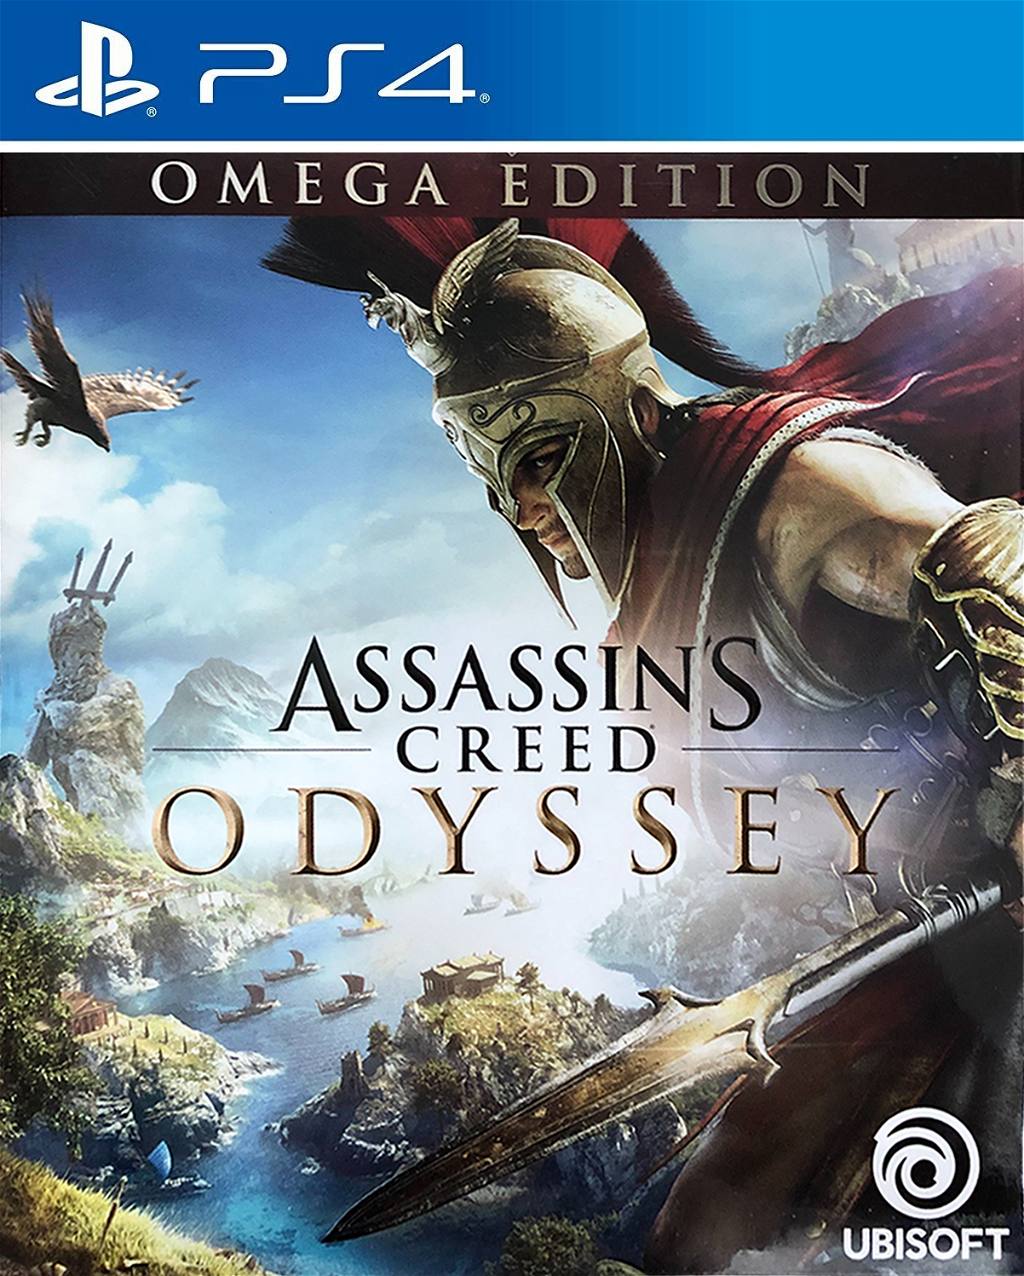 Assassin's Creed Odyssey [Omega Edition] (English & Chinese Subs) PlayStation 4